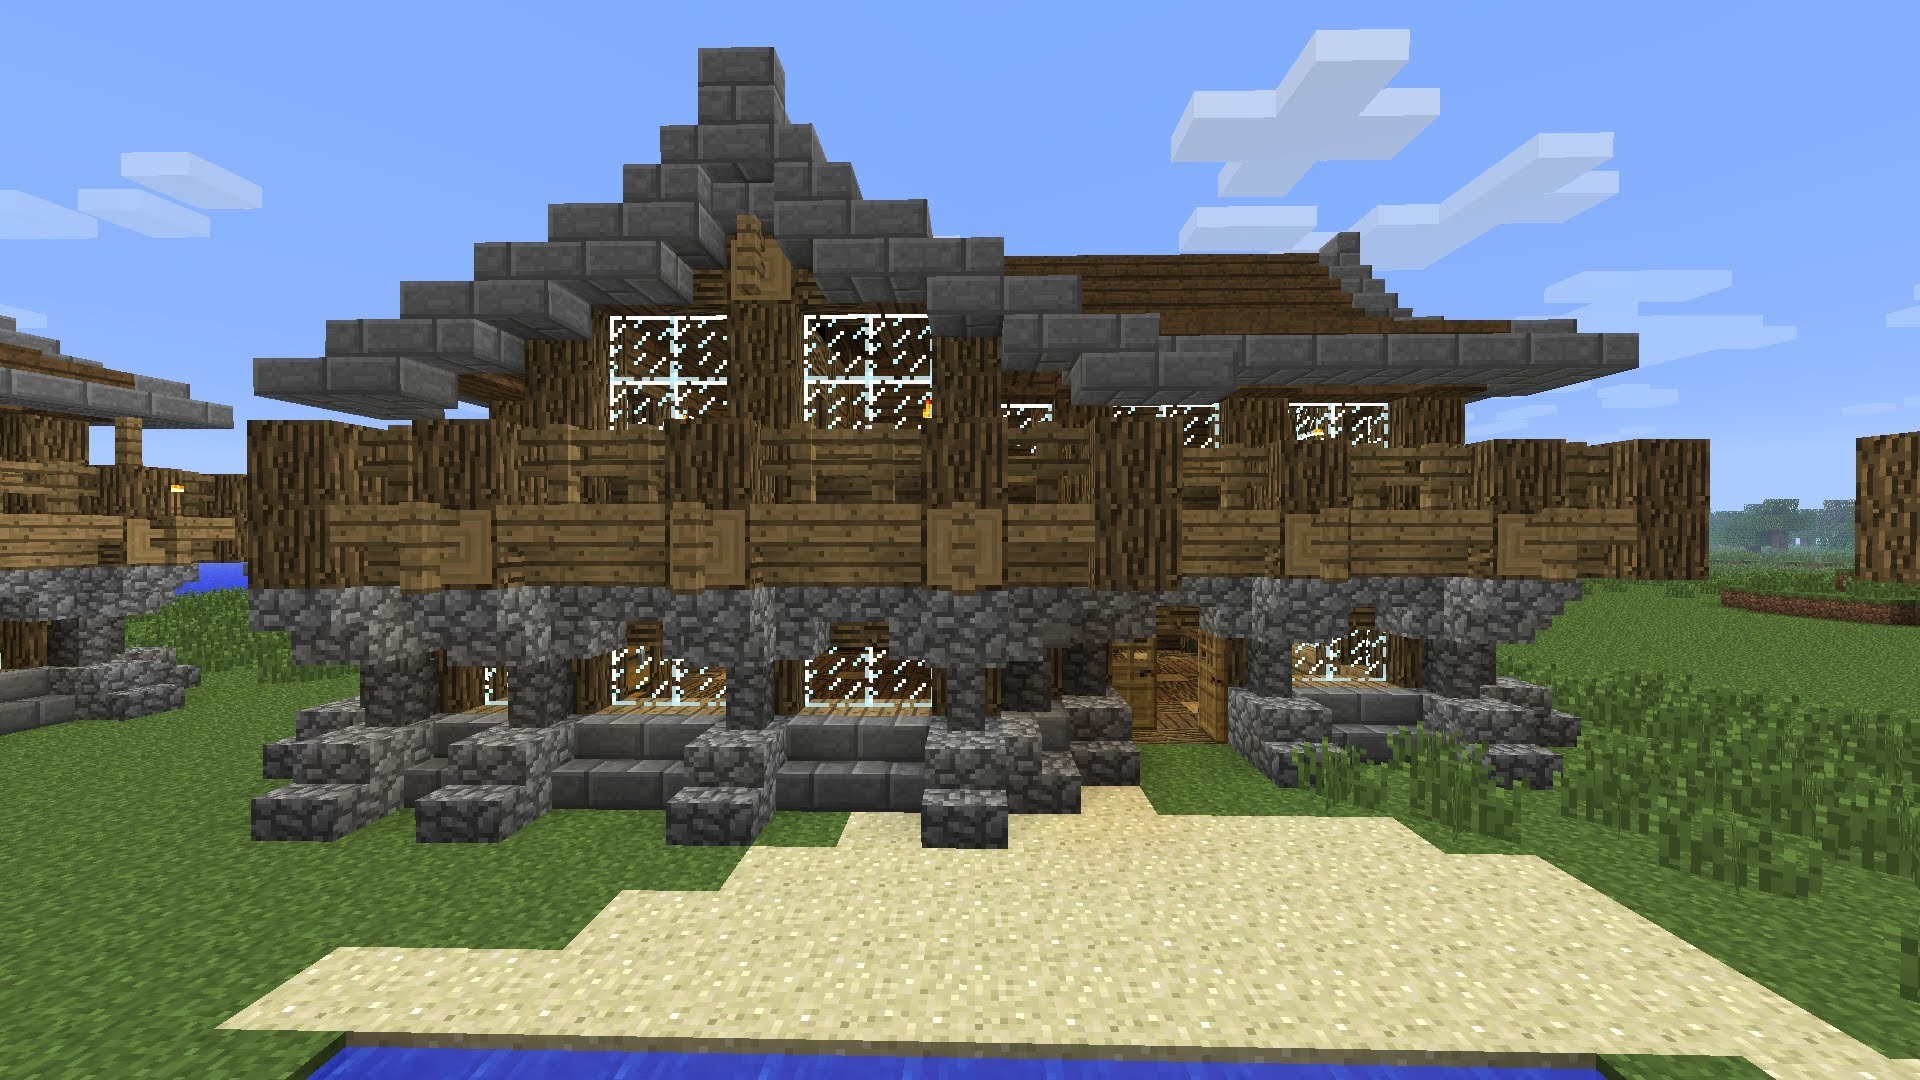 1920x1080 Minecraft - How to Build A Large Medieval Rustic Log Cabin House 3 Part 1/3  - YouTube